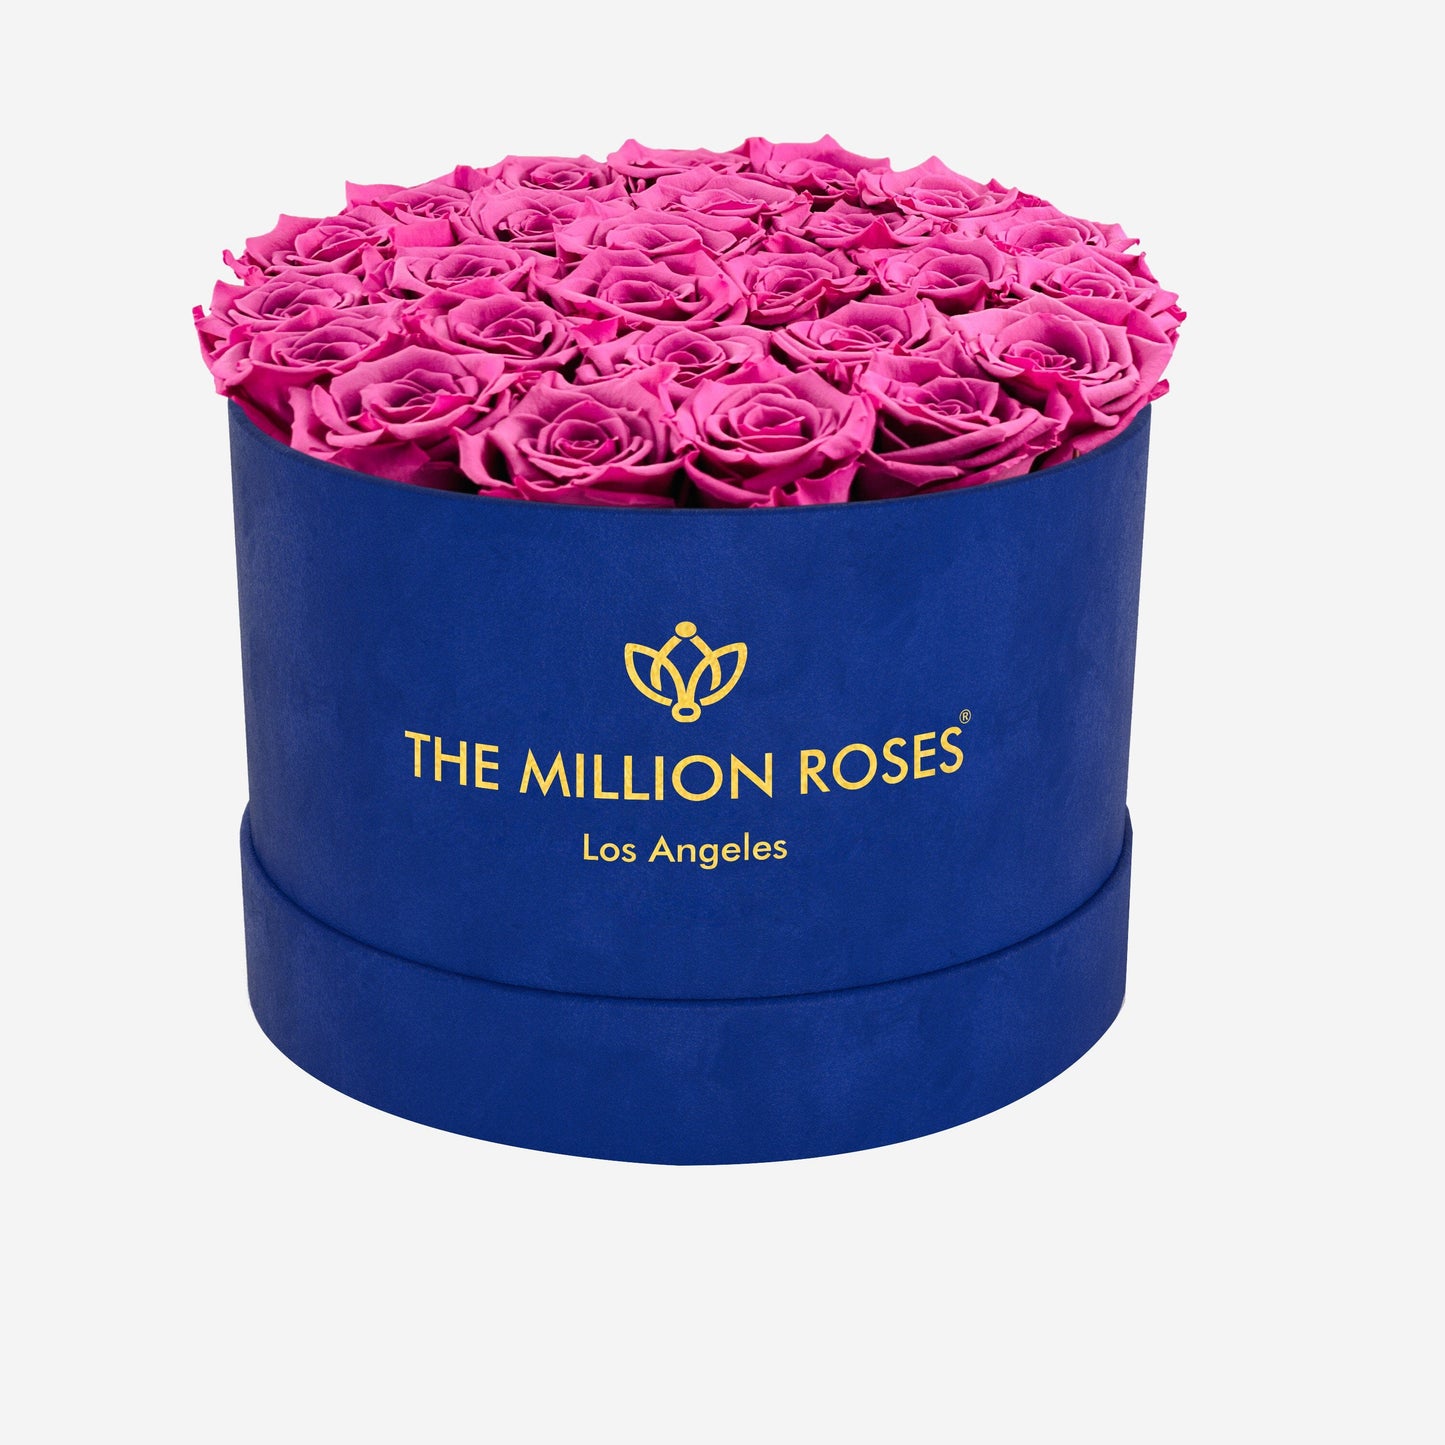 Supreme Royal Blue Suede Box | Orchid Roses - The Million Roses